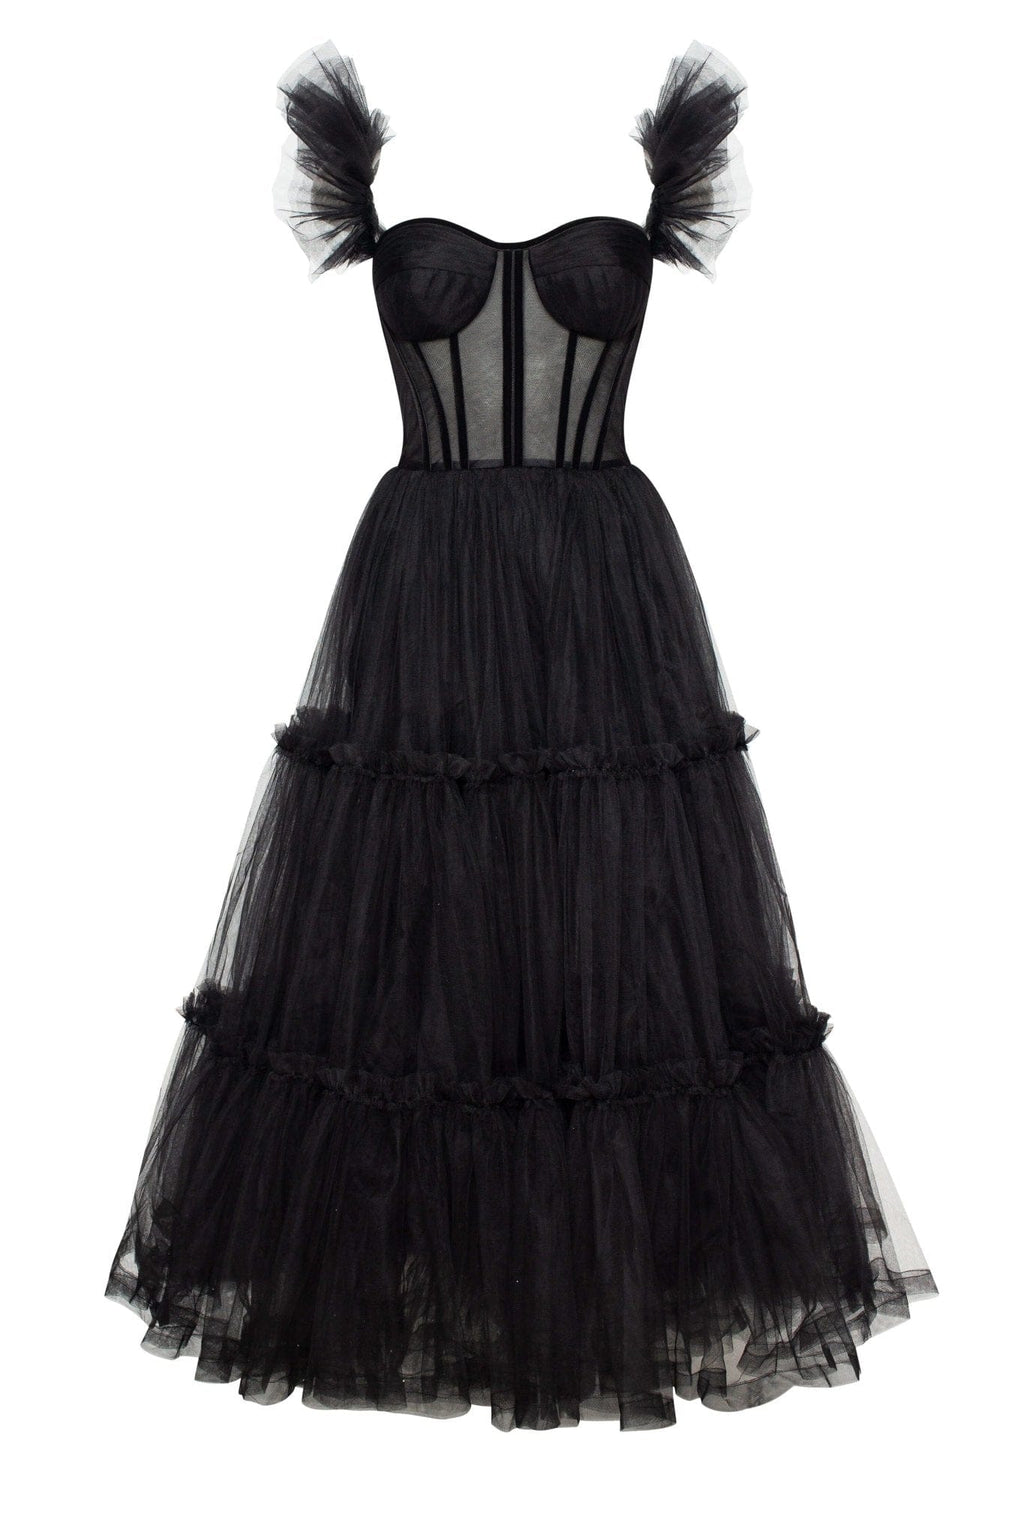 Tulle ➤ Milla Dresses - USA, Worldwide delivery